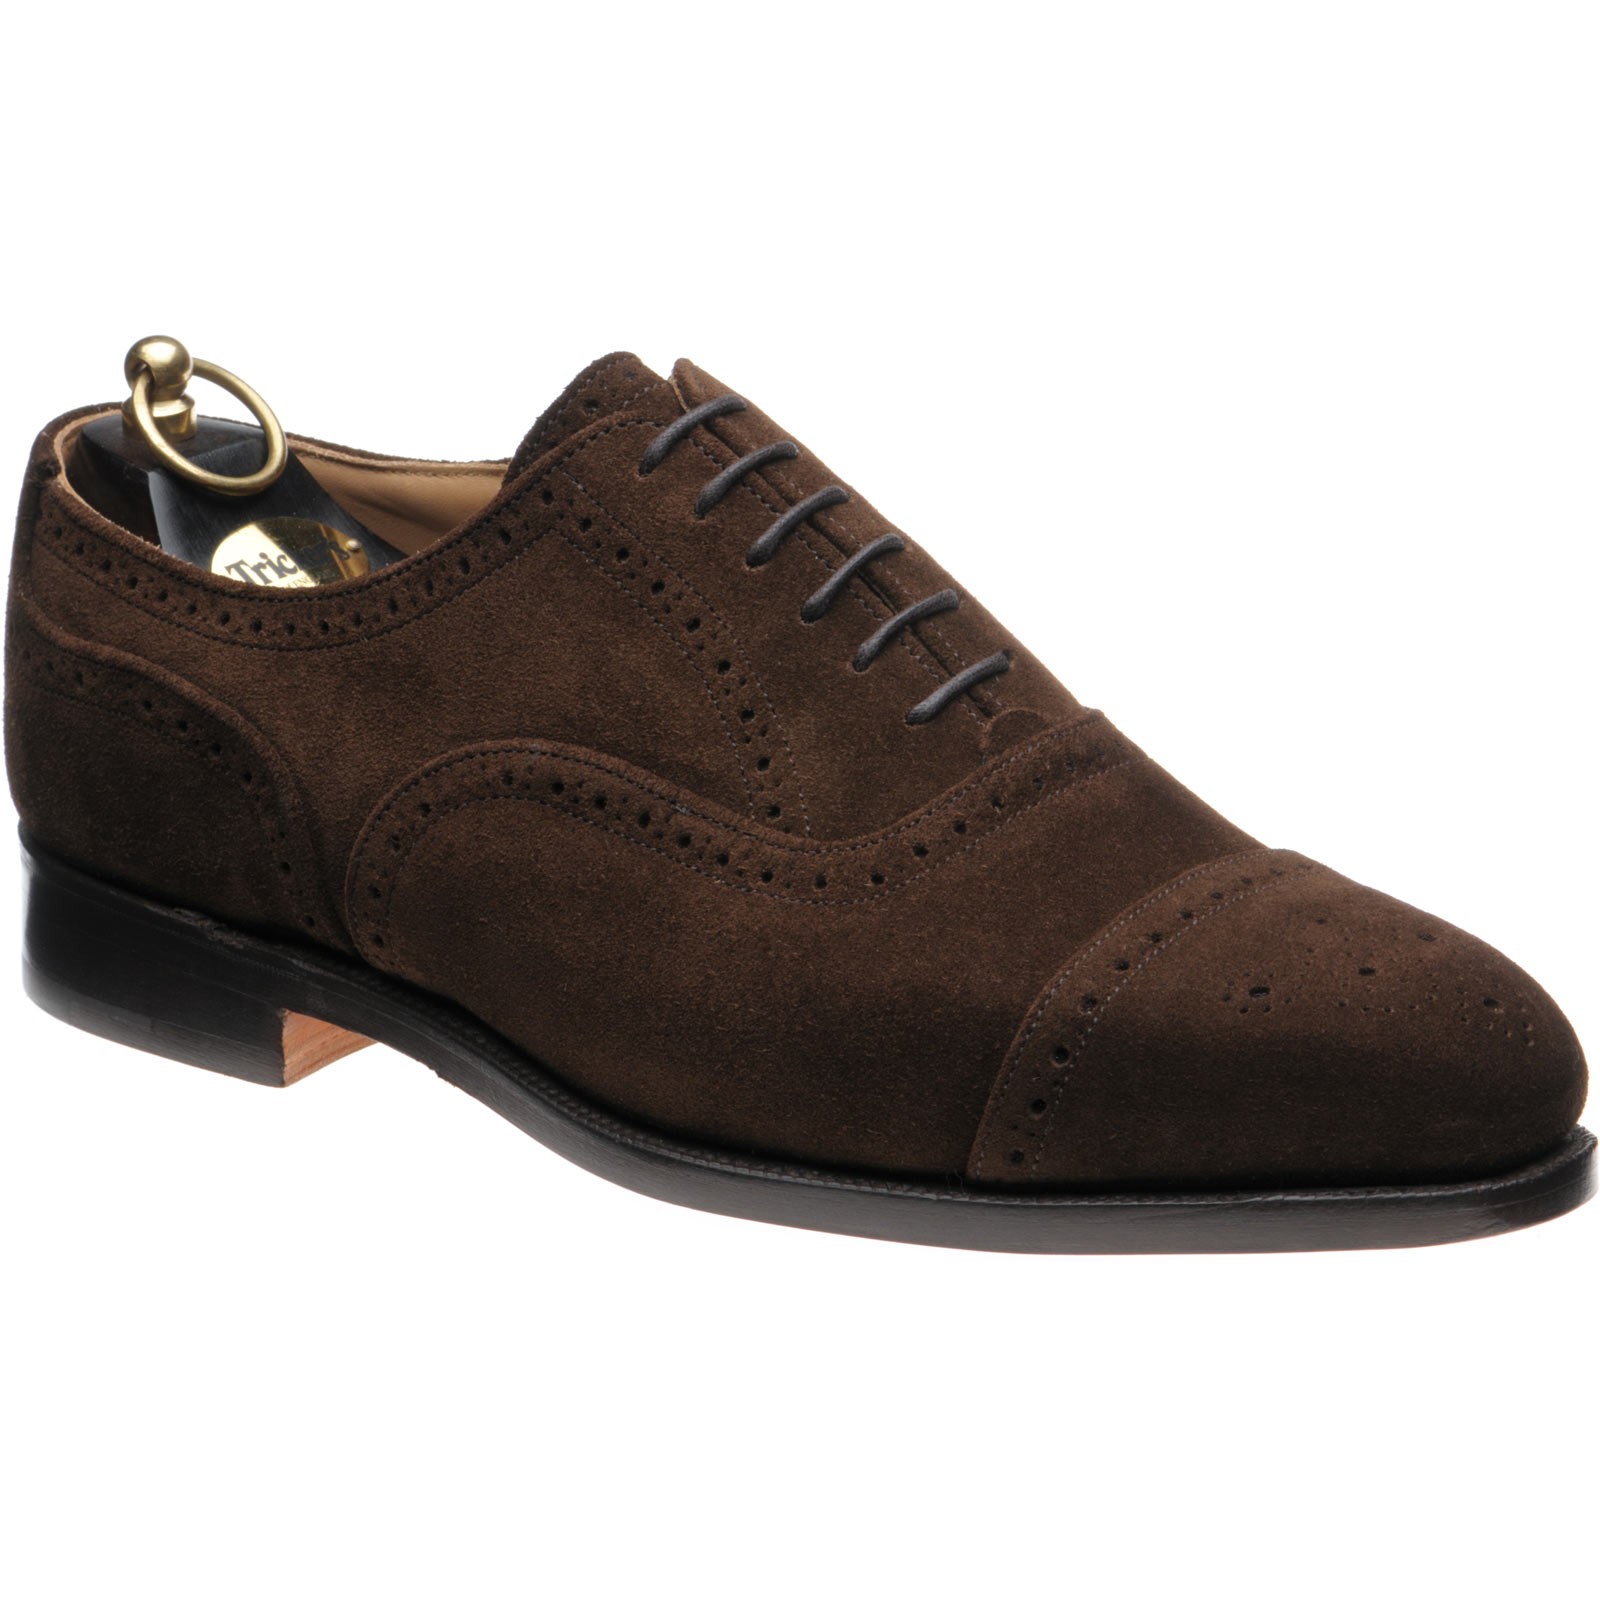 Trickers shoes | Trickers 1829 Collection | Kensington semi-brogues in ...